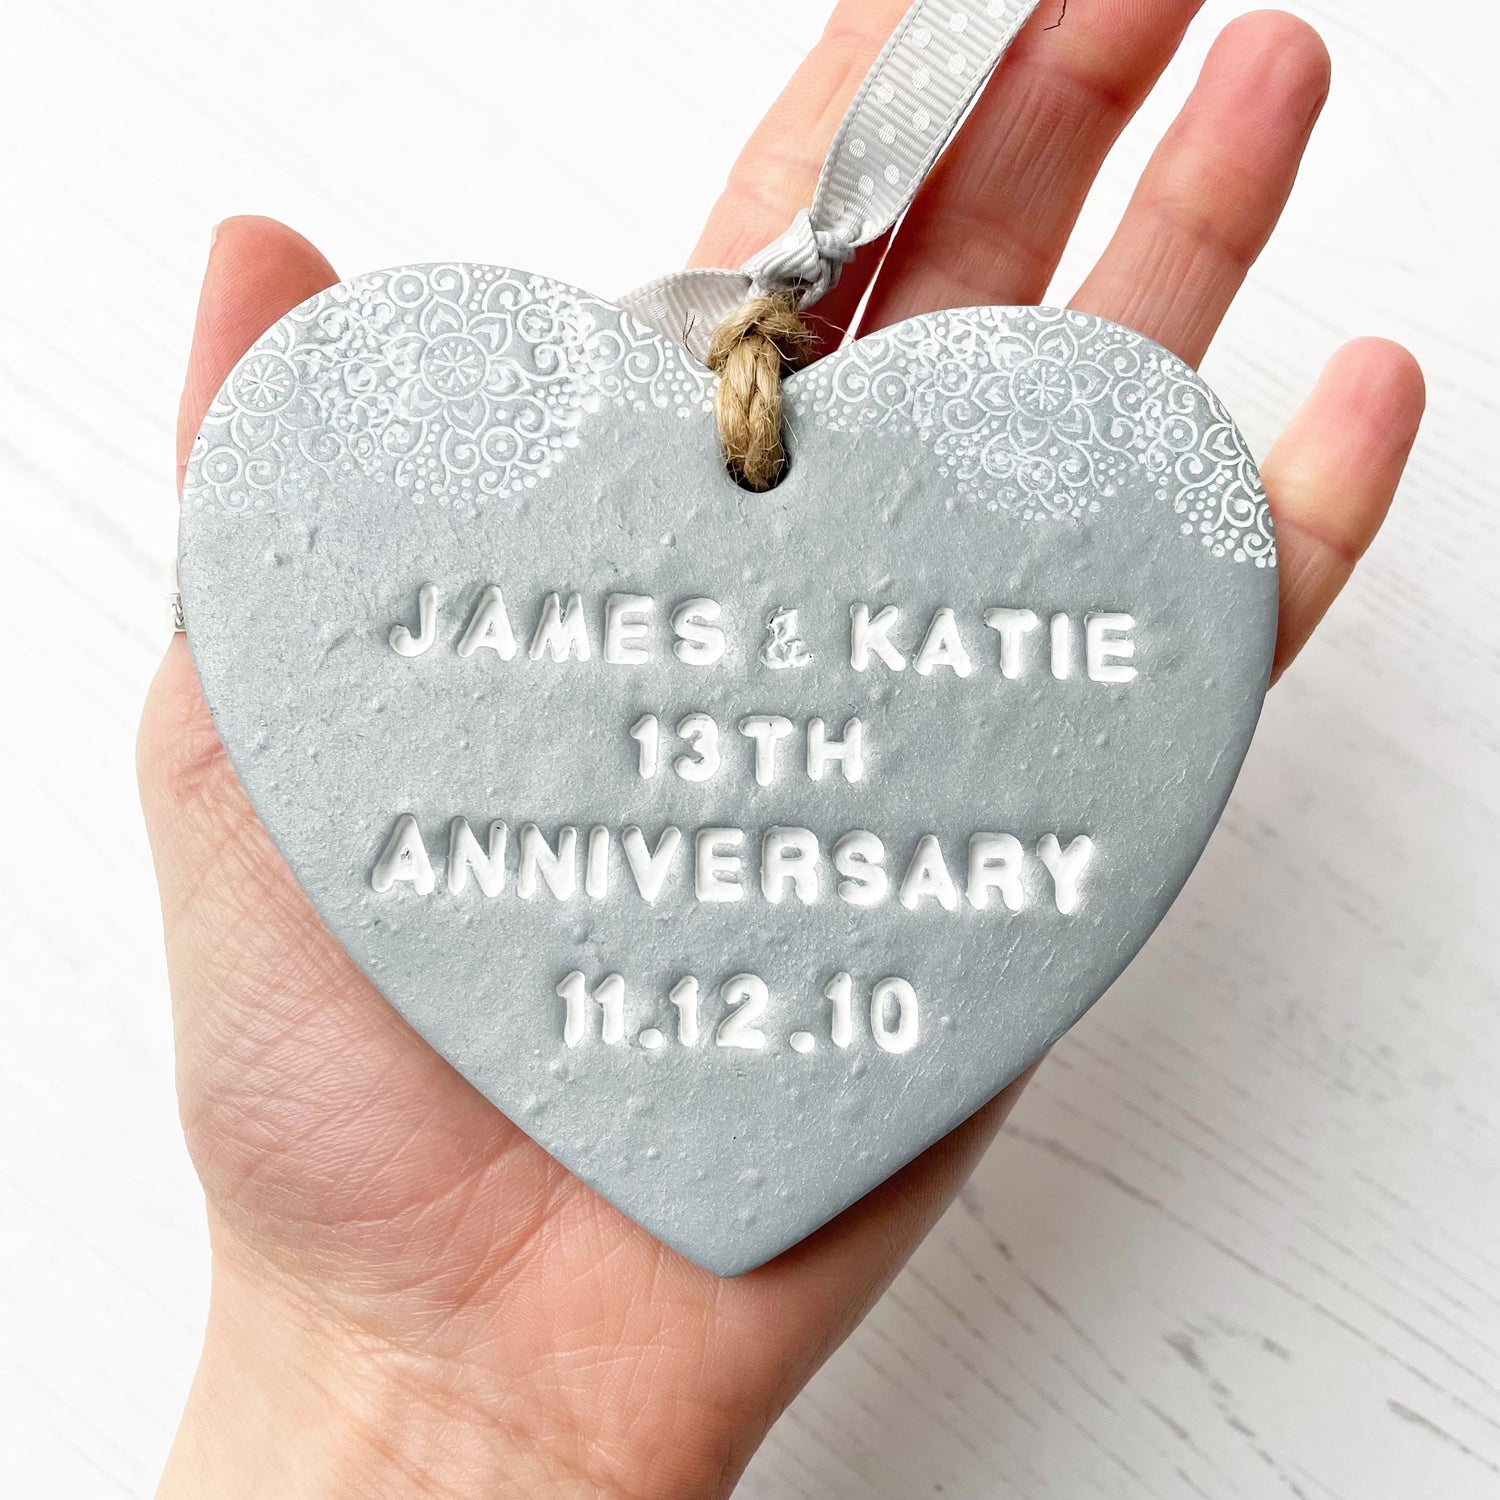 Personalised anniversary gift, silver clay heart with a white lace edge at the top of the heart with jute twine for hanging, the heart is personalised with JAMES & KATIE 13TH ANNIVERSARY 11.12.10